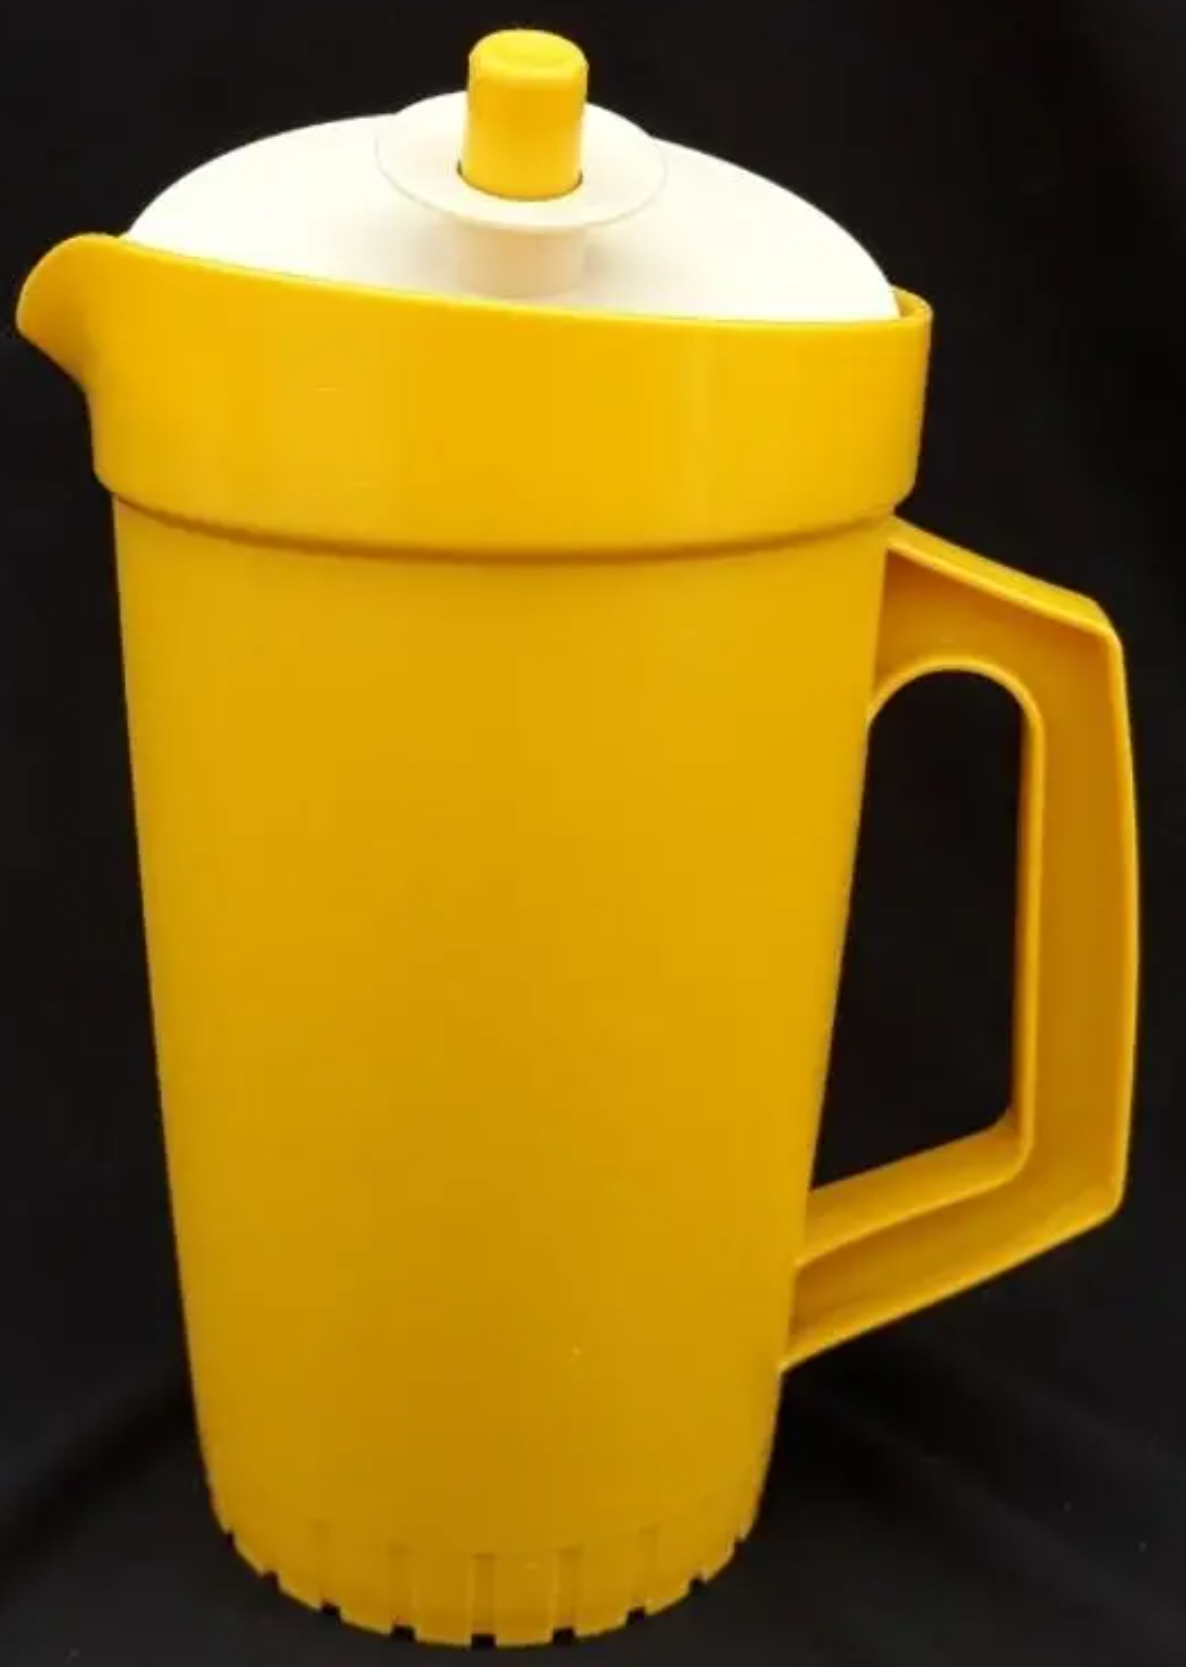 A yellow pitcher for juice or water